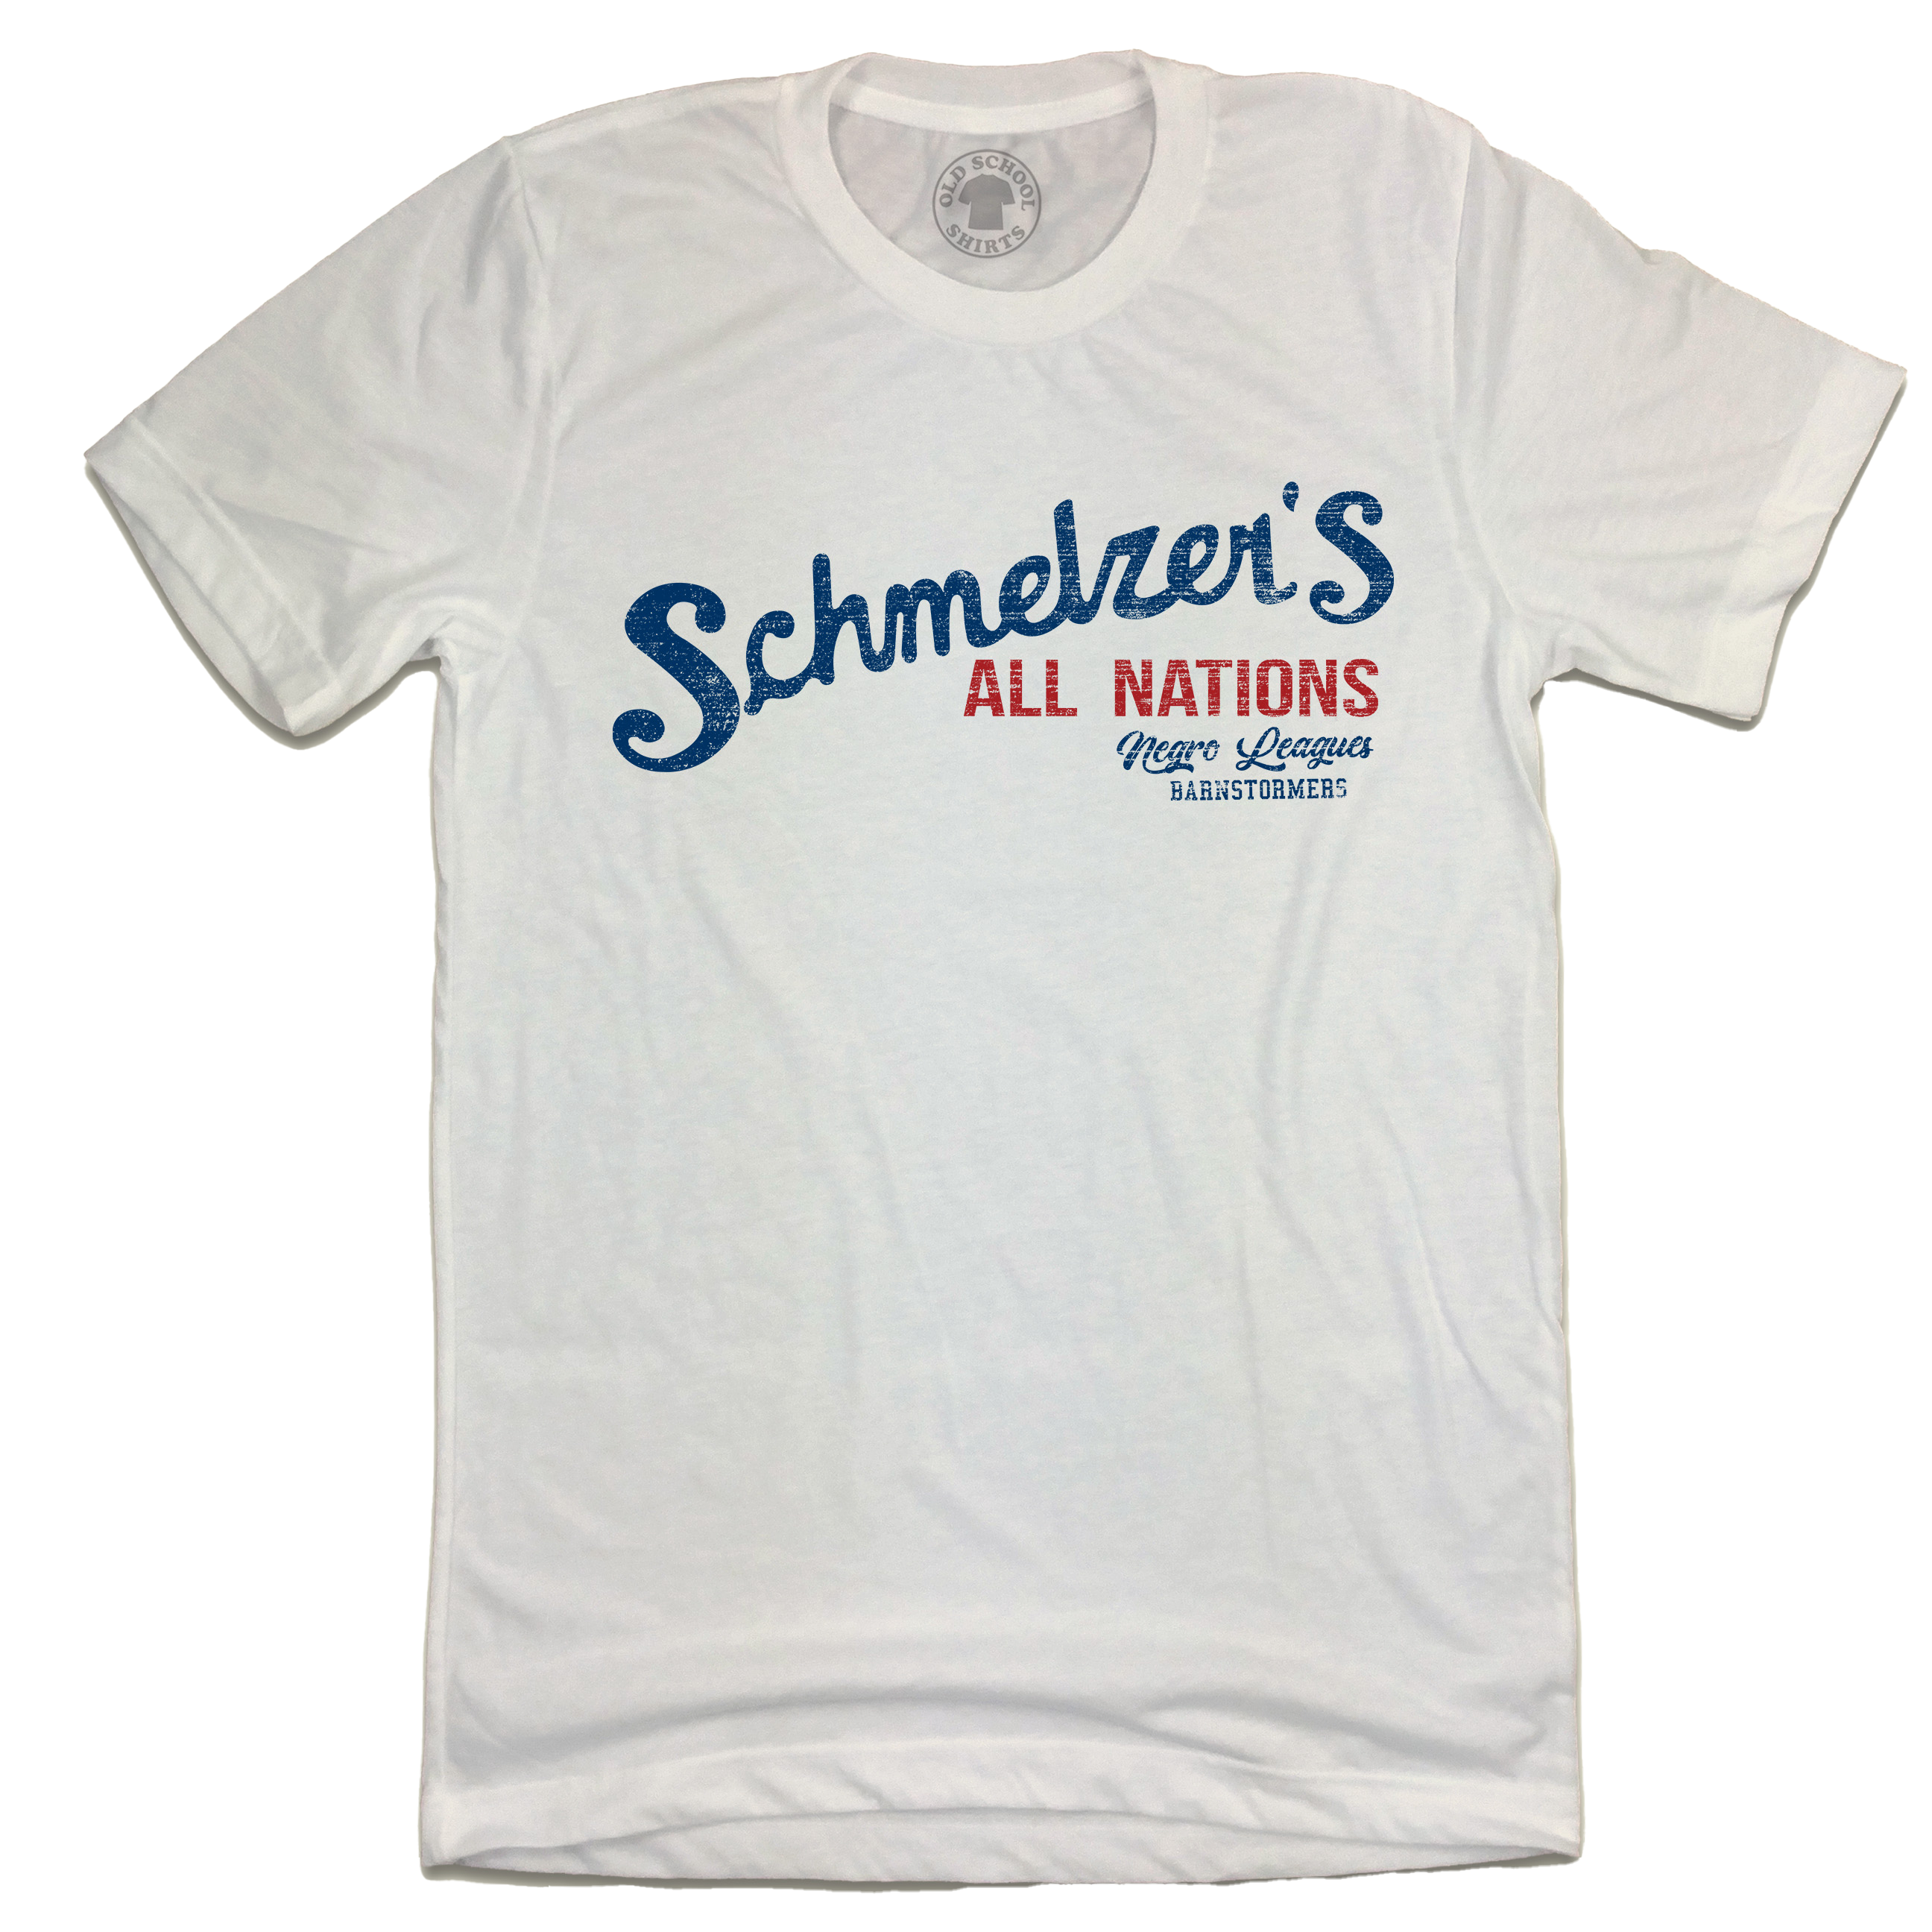 Schmelzer's All Nations